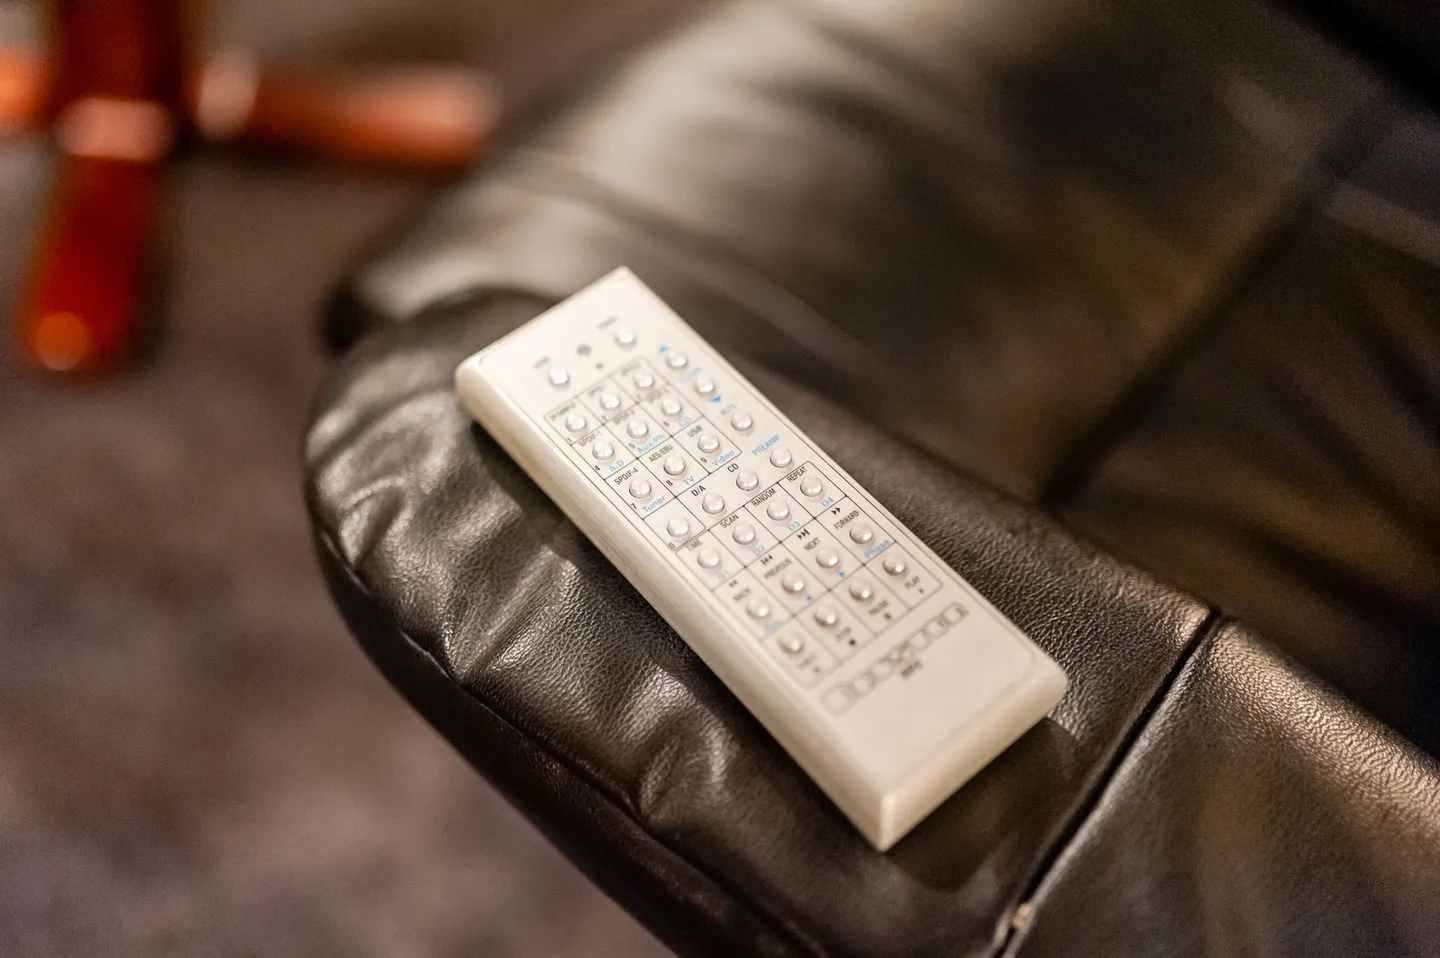 A remote control sitting on top of a black leather chair.